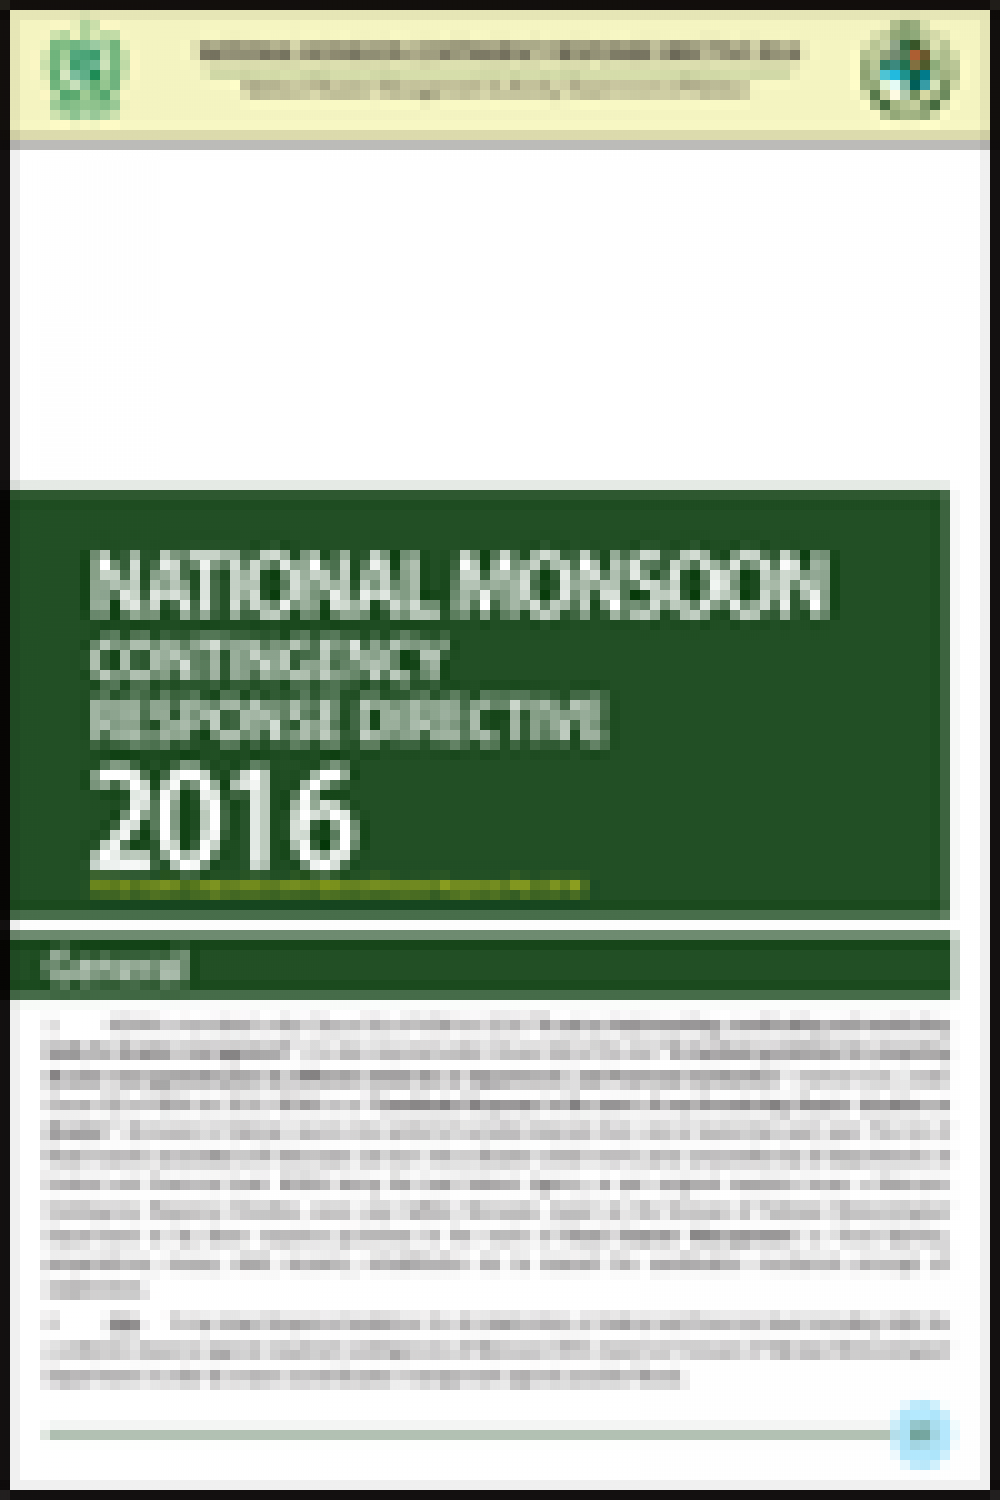 National Monsoon Contingency Response Directive 2016